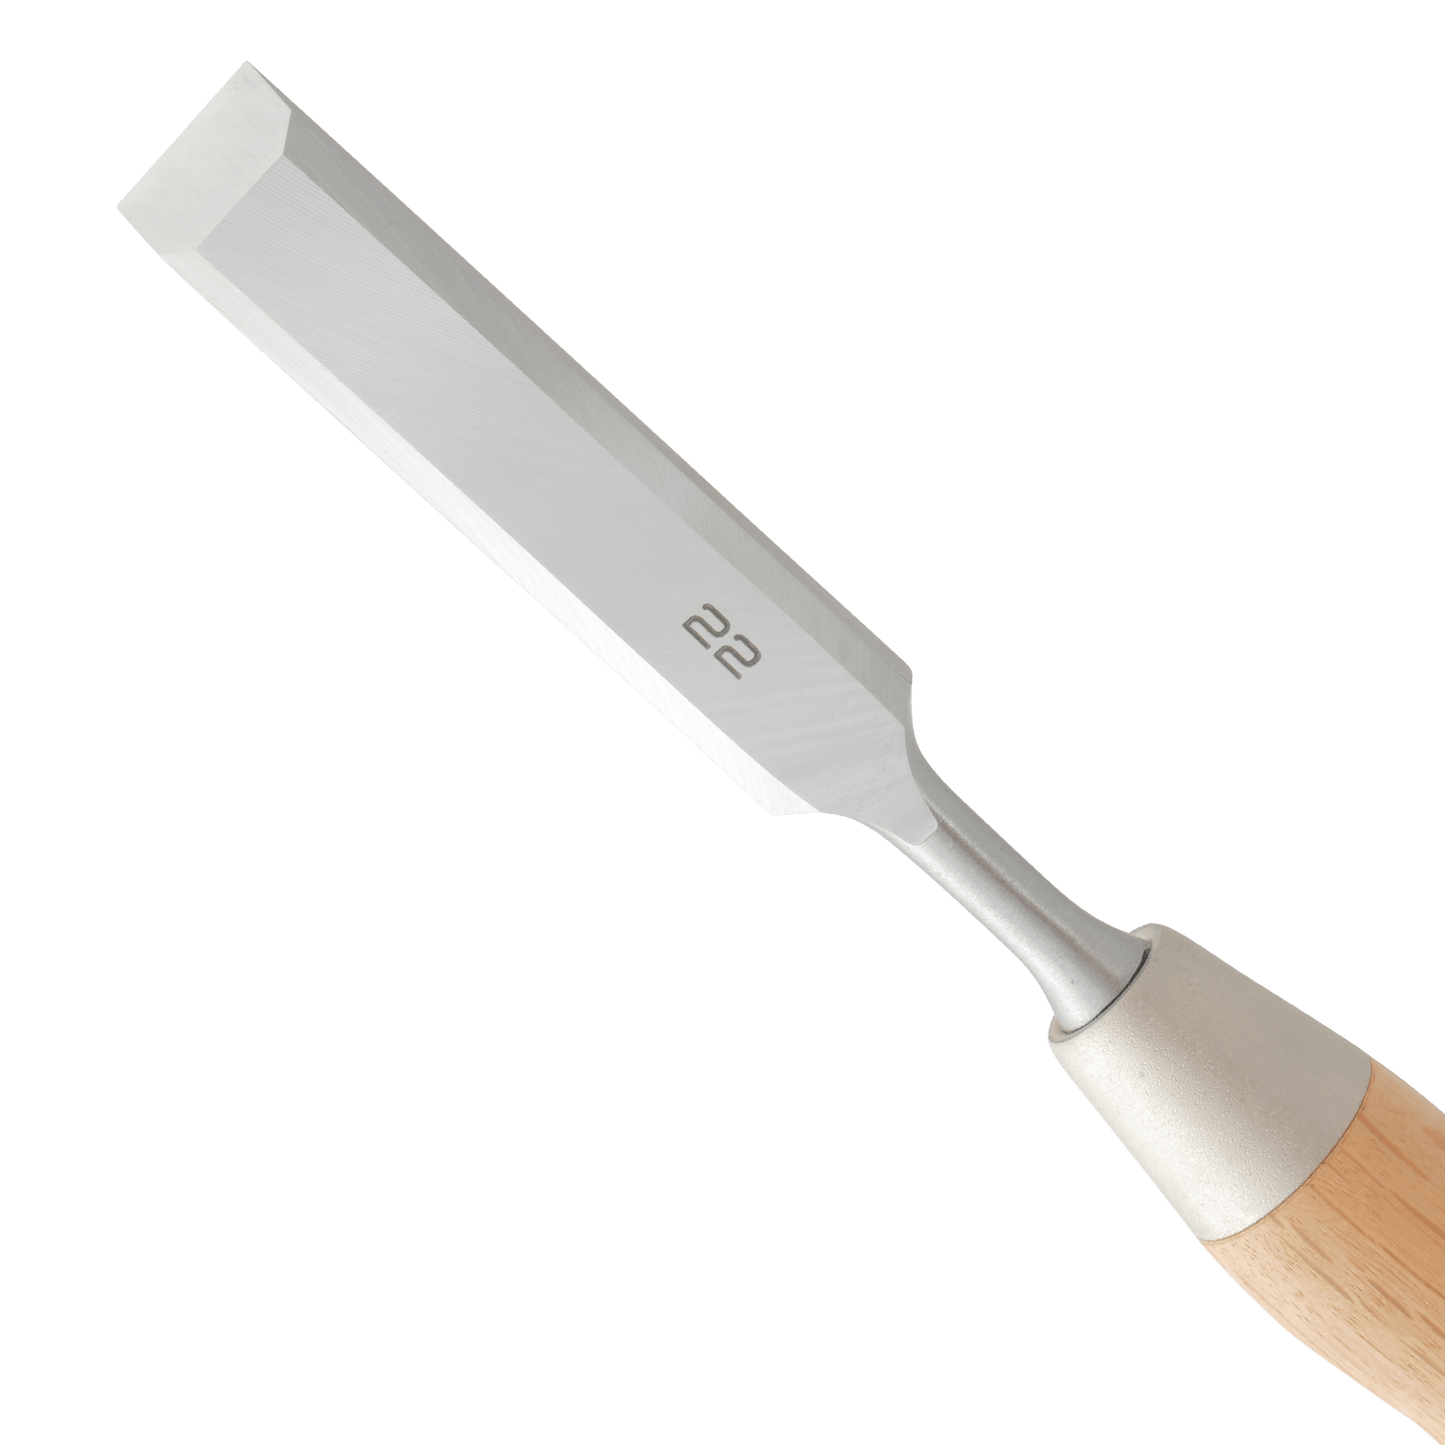 The Akagashi Chisel represents a Japanese and Western Hybrid. These Awesome Japanese chisels are now available at our website www.sigtools.co.nz 